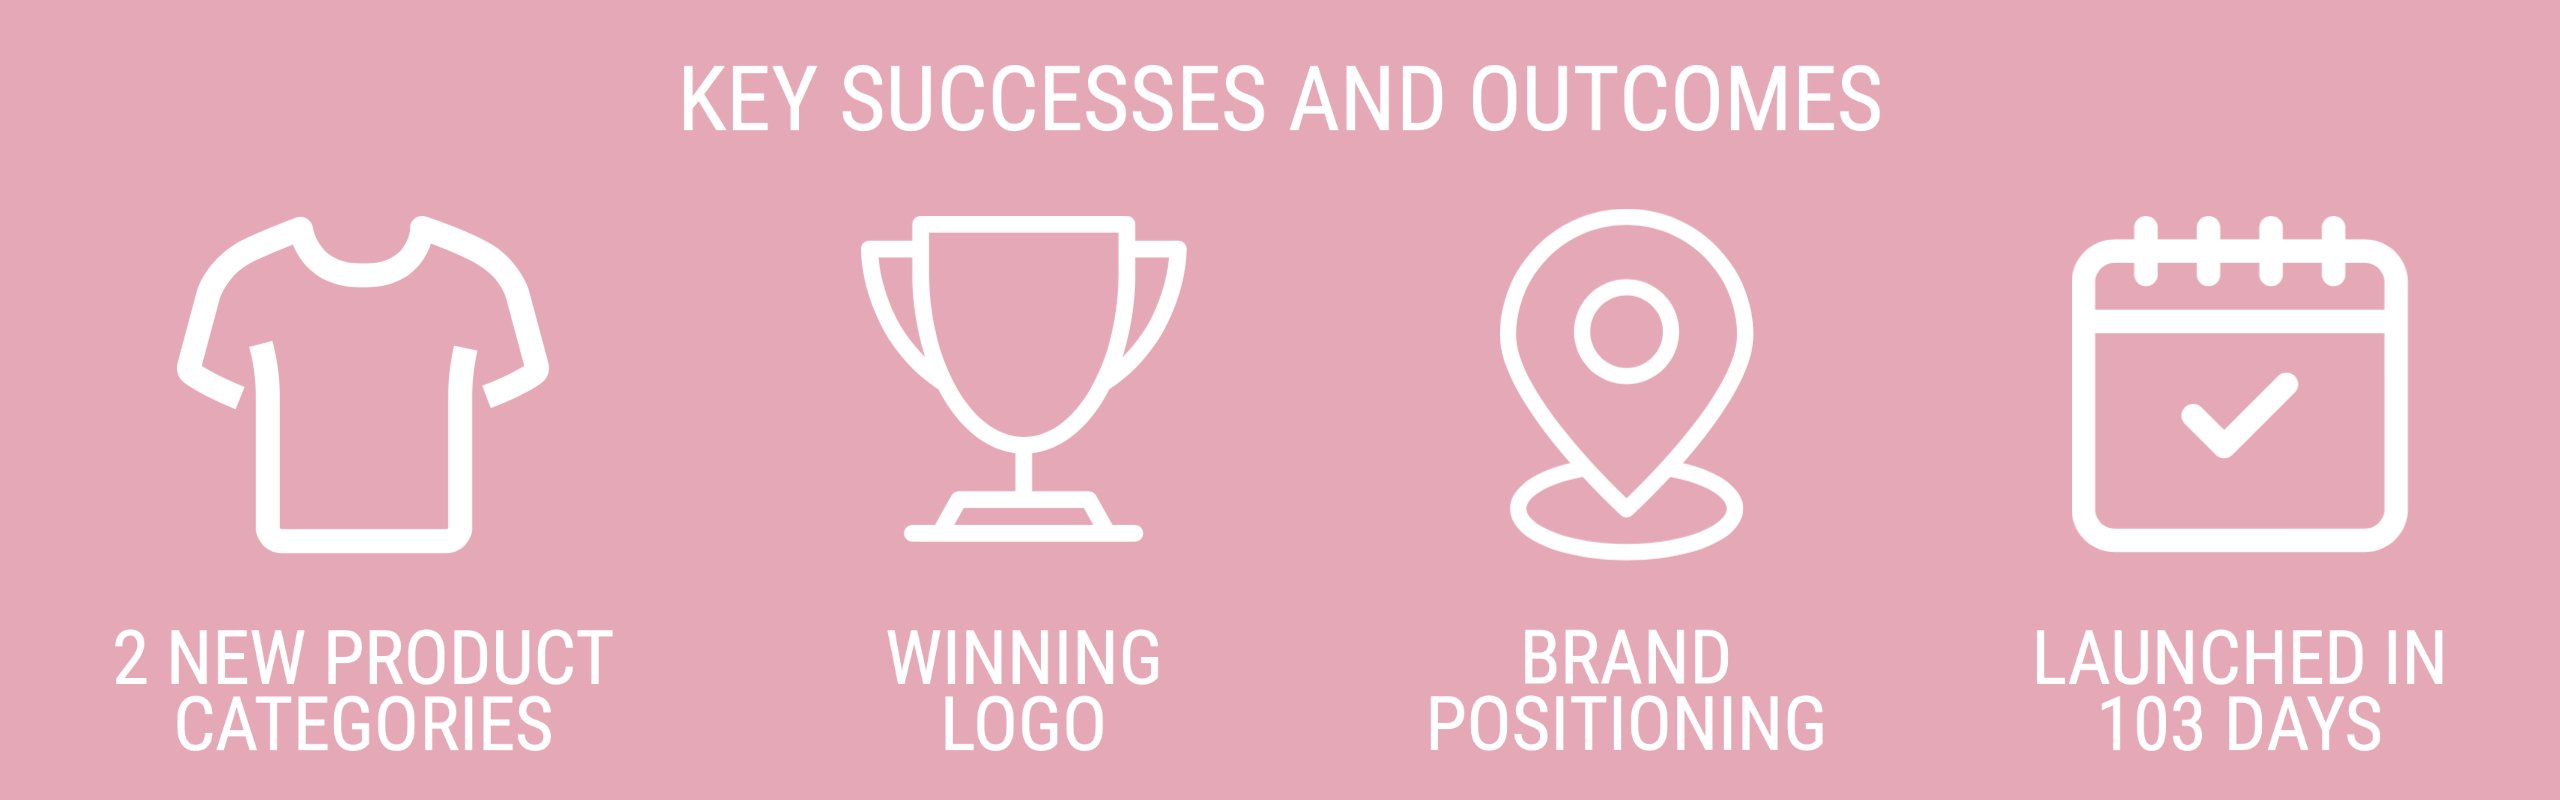 francescas key outcomes two new product categories winning logo brand positioning launched in 103 days